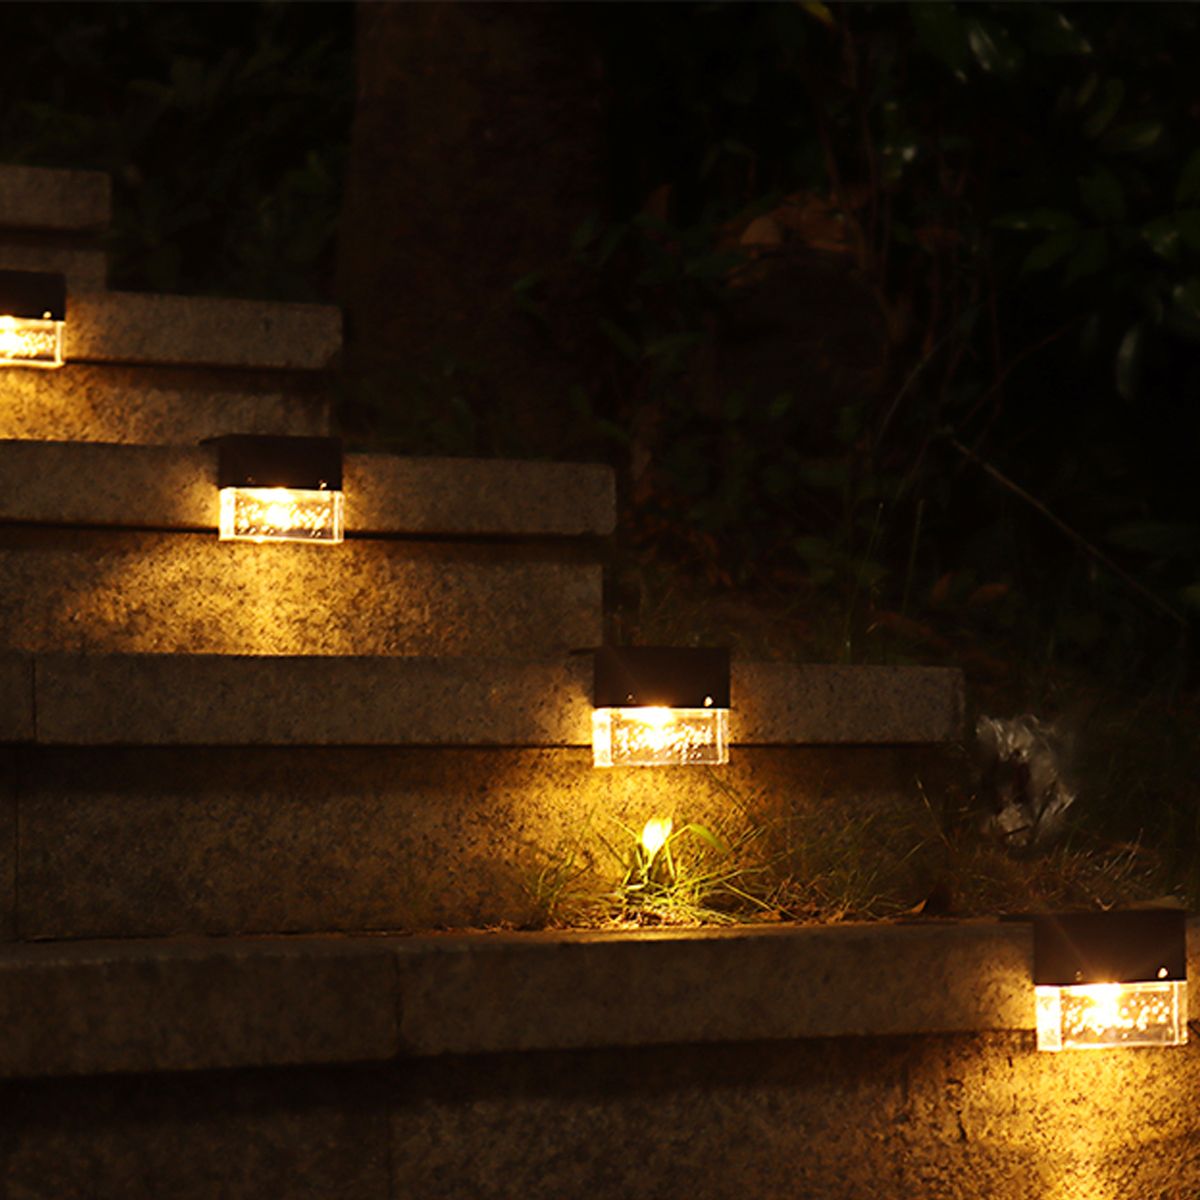 14Pcs-Solar-LED-Deck-Lights-Outdoor-Garden-Pathway-Stairs-Step-Fence-Lamps-Waterproof-for-Courtyard--1712182